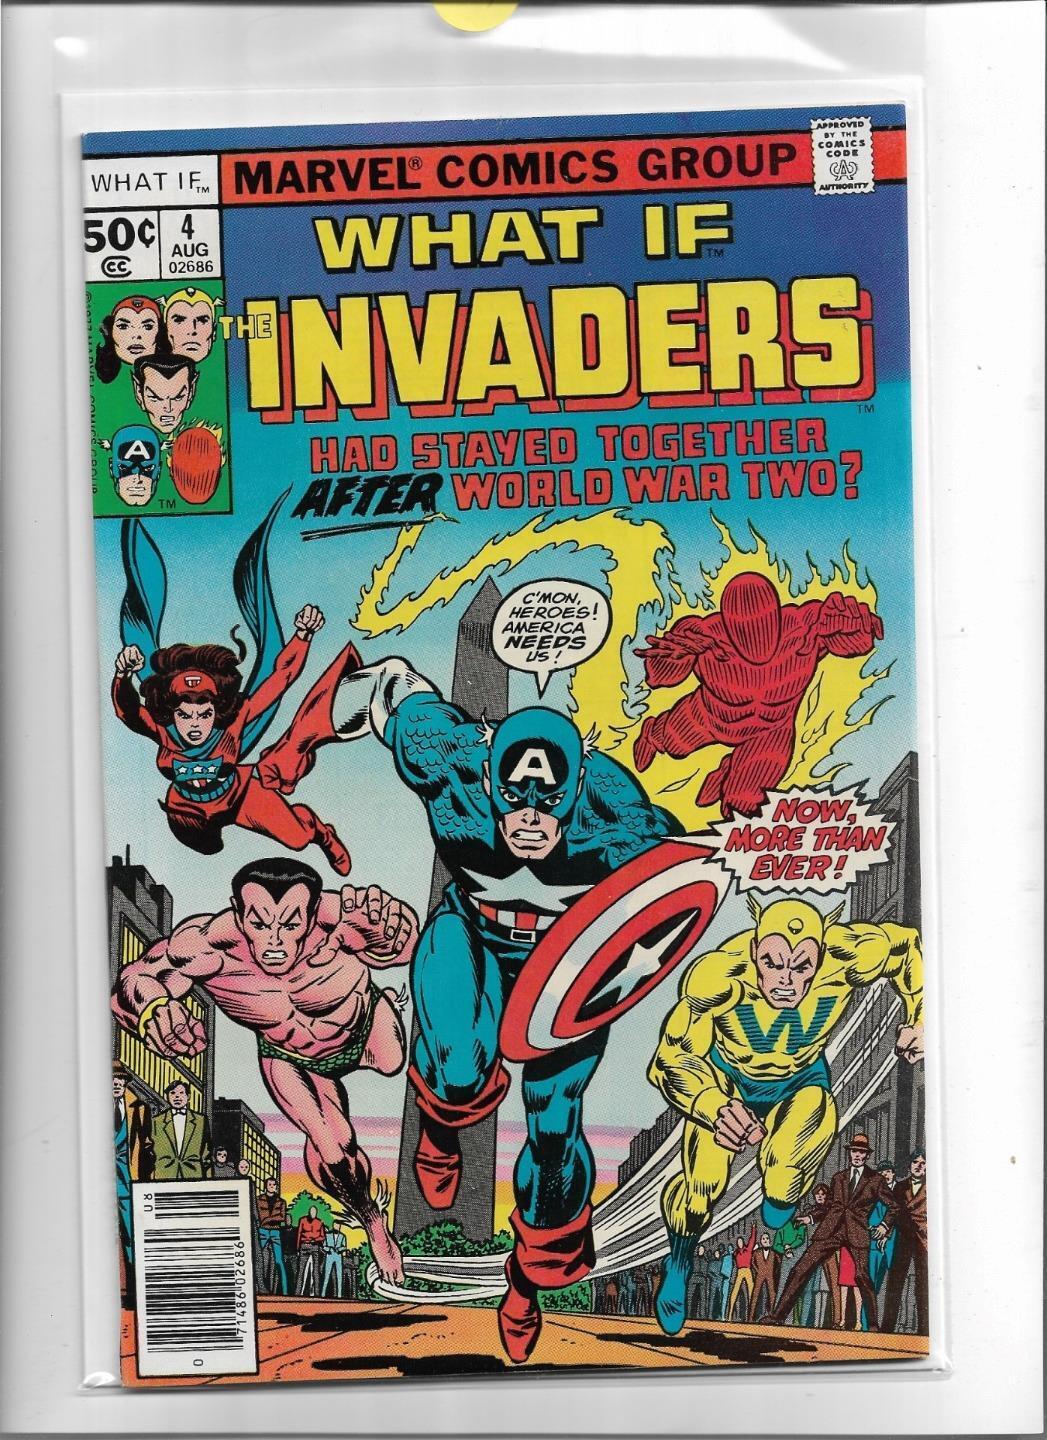 WHAT IF? #4 1977 VERY FINE-NEAR MINT 9.0 4129 INVADERS